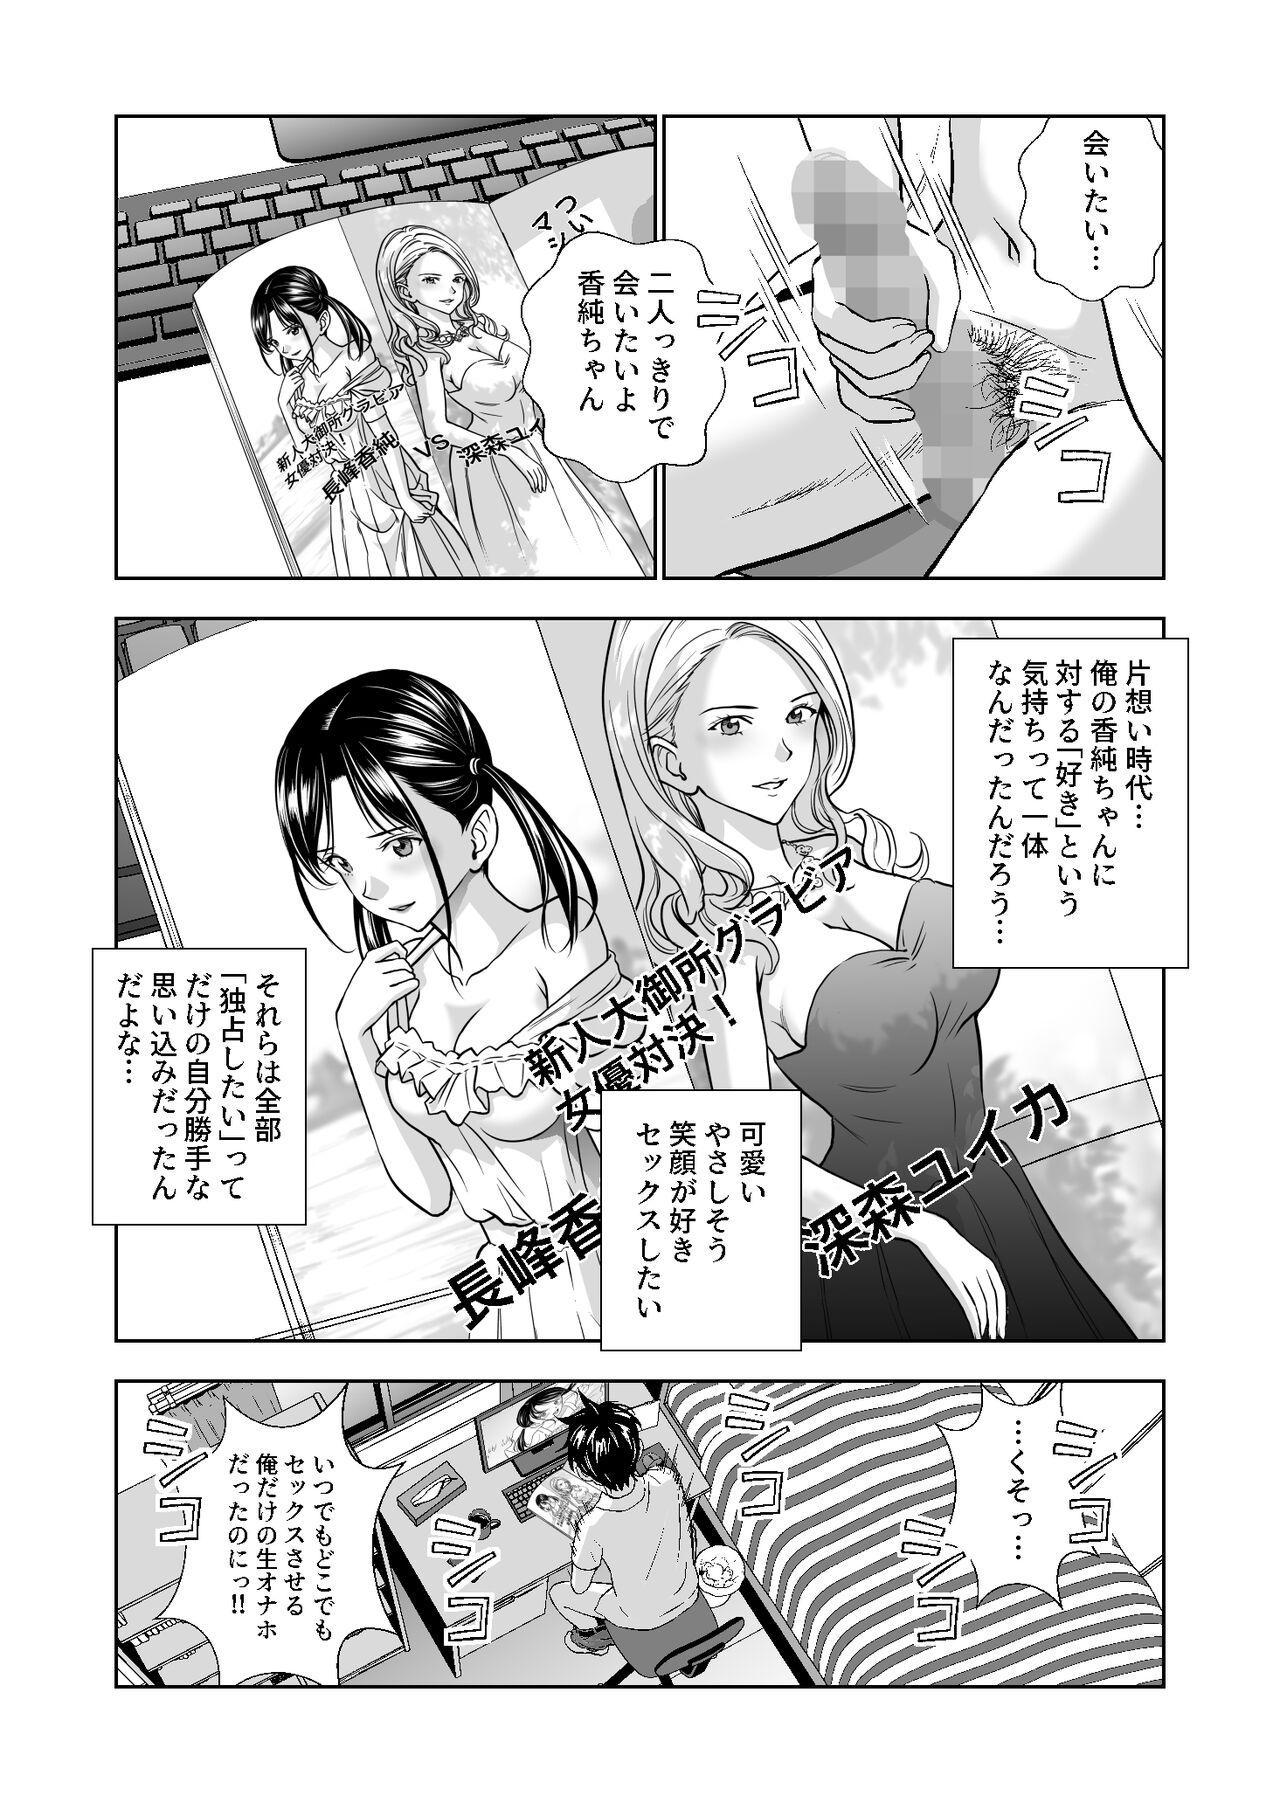 Animation 春くらべ4 - Original Firsttime - Page 3